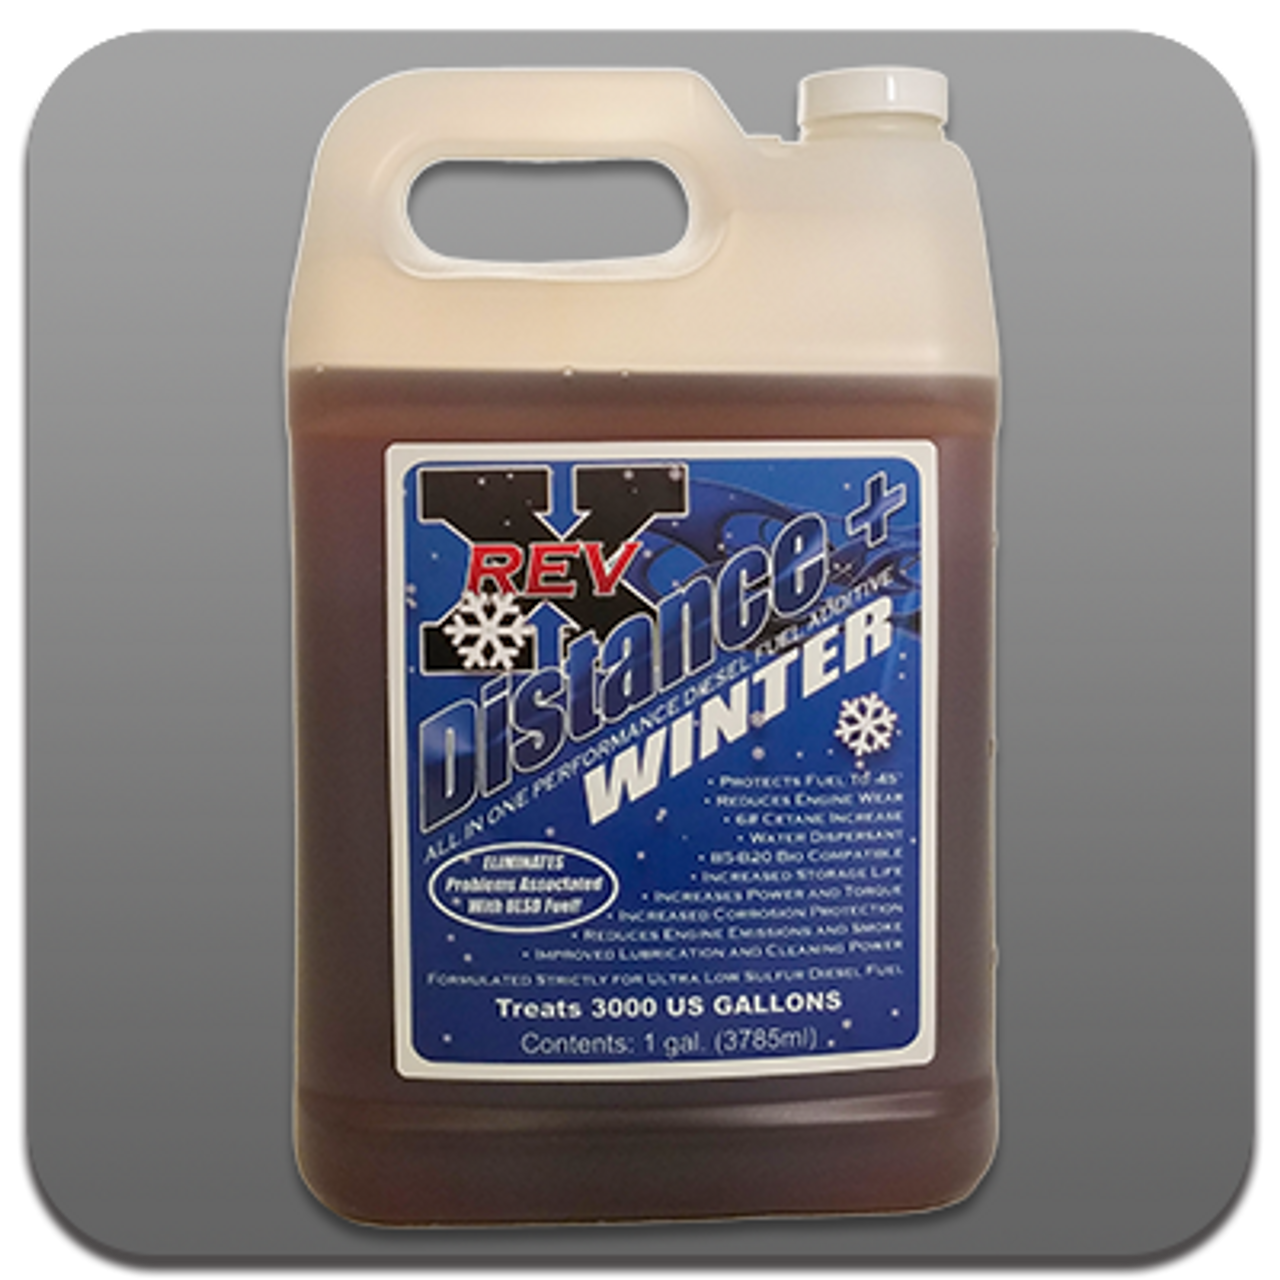 AMSOIL Diesel All-In-One Fuel Additive